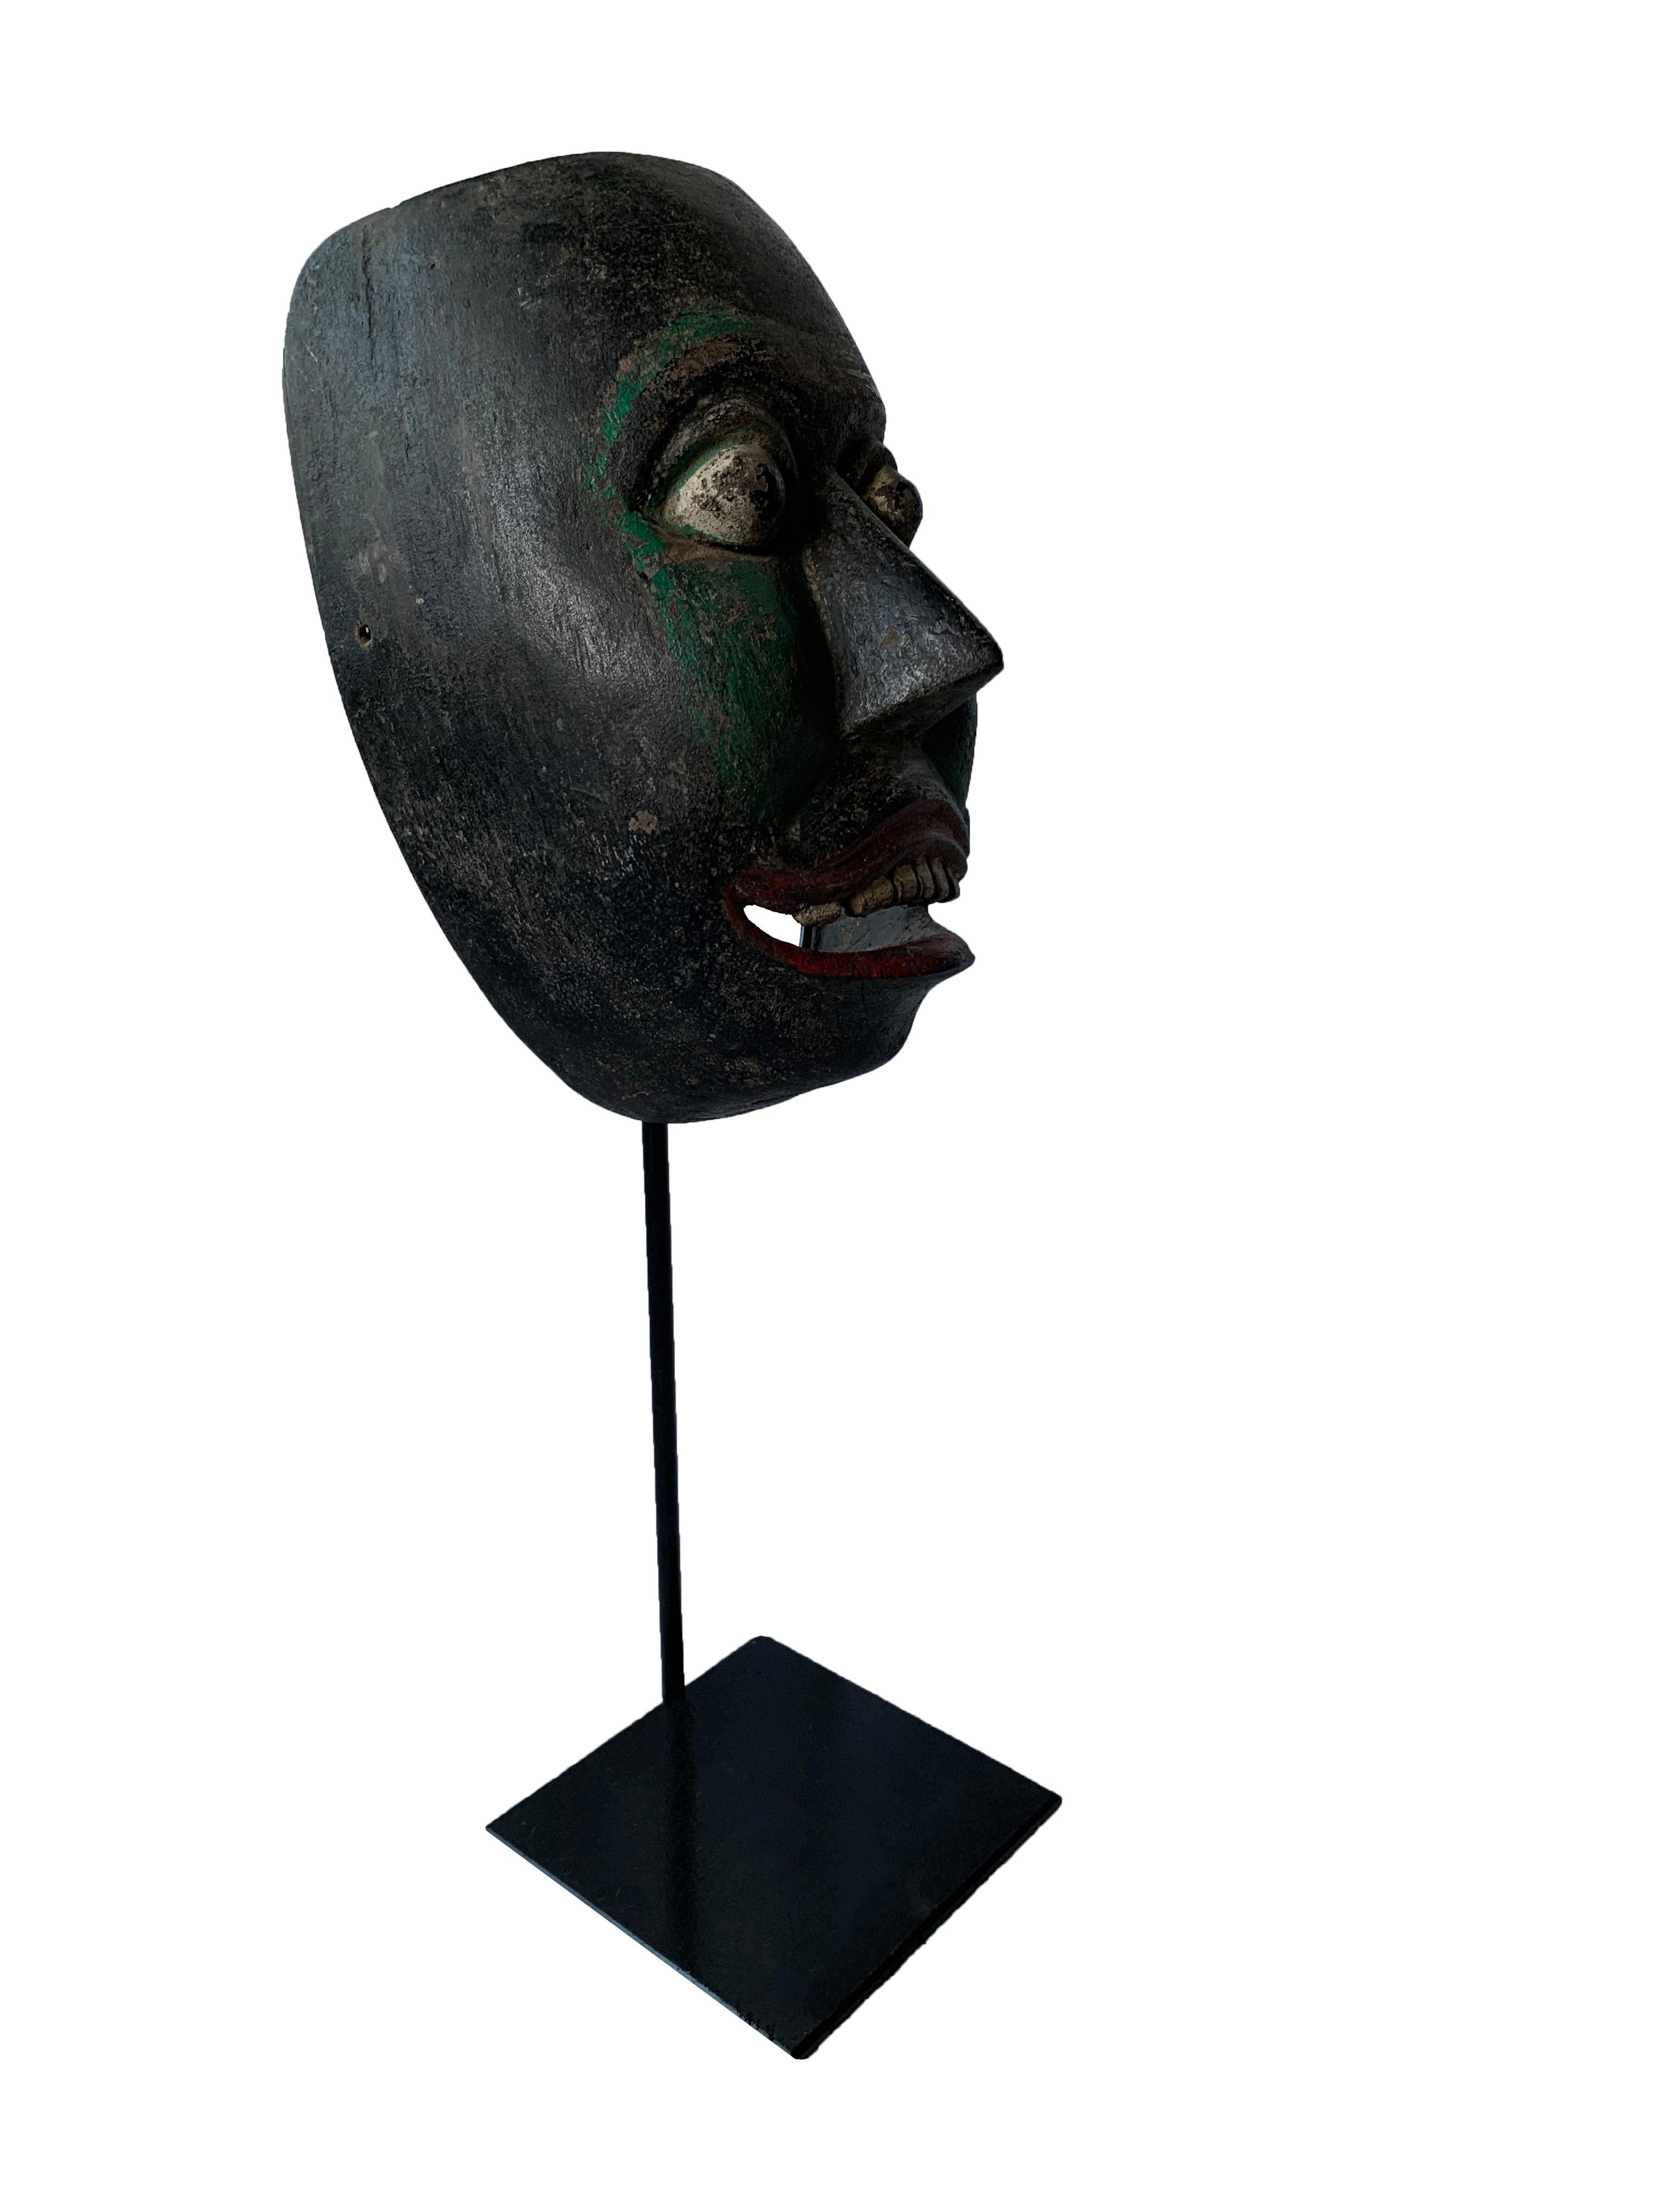 This early 20th century ‘Wayang topeng’ mask was used in Javanese masked dance performances. This mask features a black and green polychrome finish on its face with burgundy lips and upper teeth exposed. Much of the polychrome has faded over the